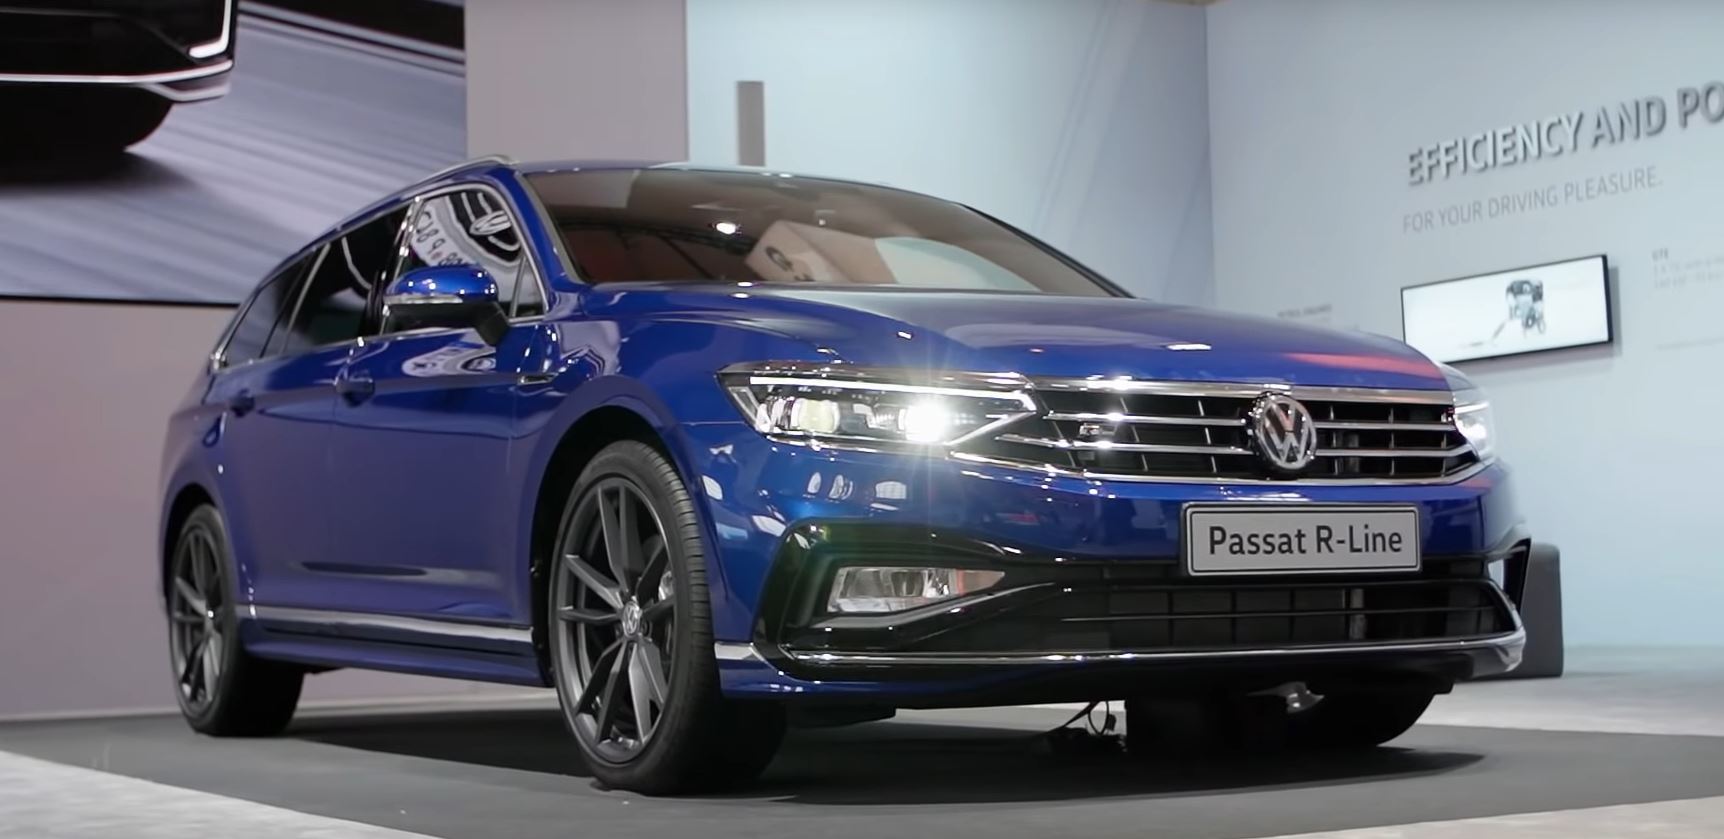 19 Vw Passat B8 Facelift Gets Detailed Walkaround Video Inside And Out Autoevolution